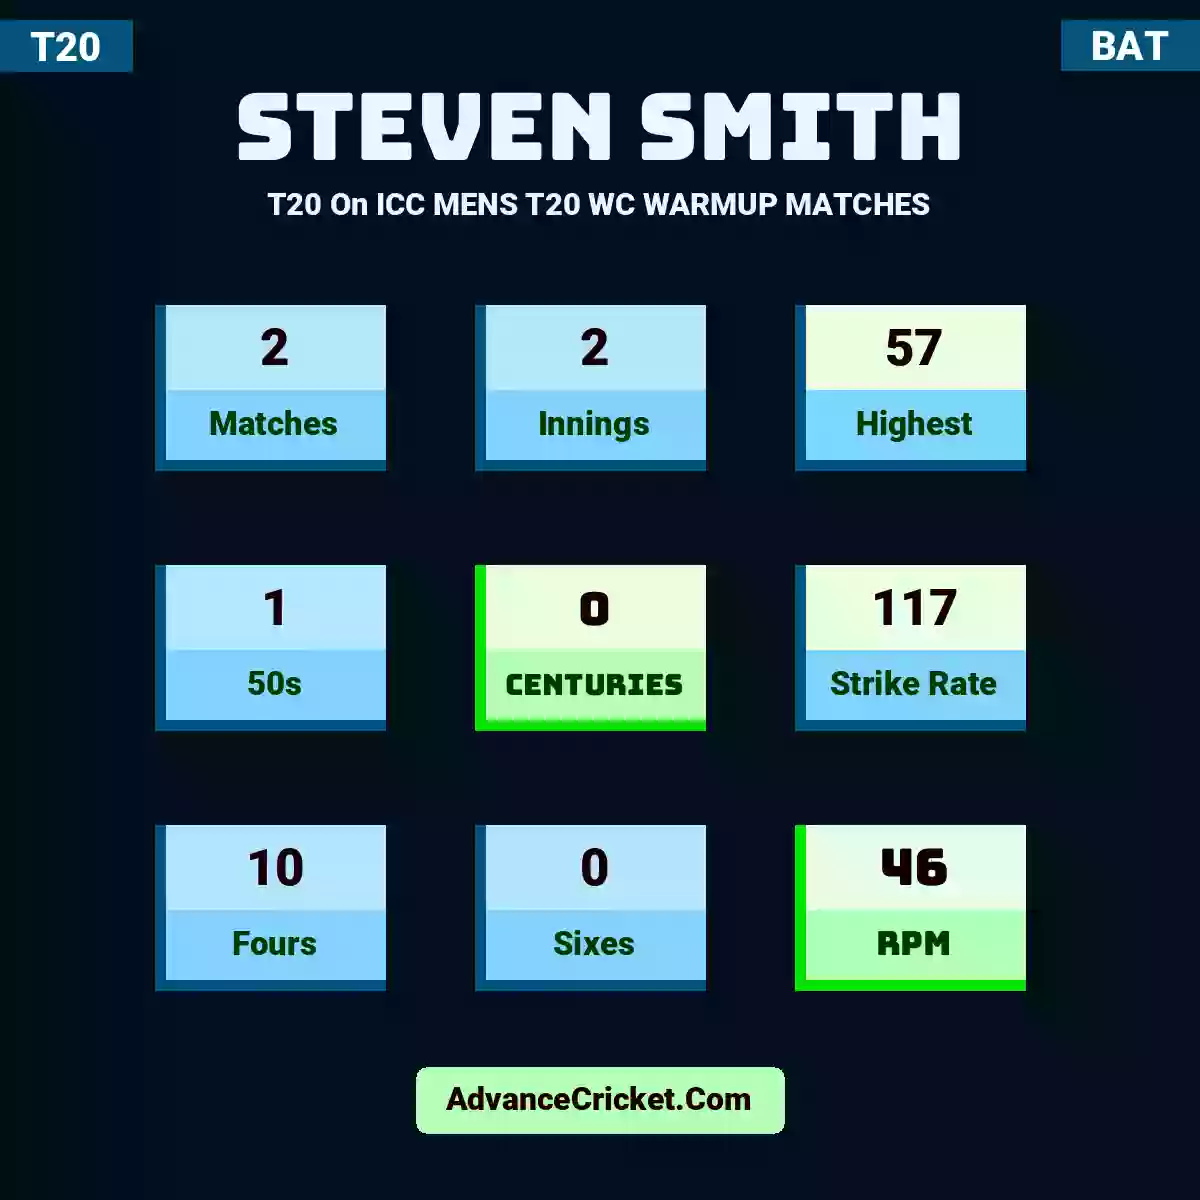 Steven Smith T20  On ICC MENS T20 WC WARMUP MATCHES, Steven Smith played 2 matches, scored 57 runs as highest, 1 half-centuries, and 0 centuries, with a strike rate of 117. S.Smith hit 10 fours and 0 sixes, with an RPM of 46.